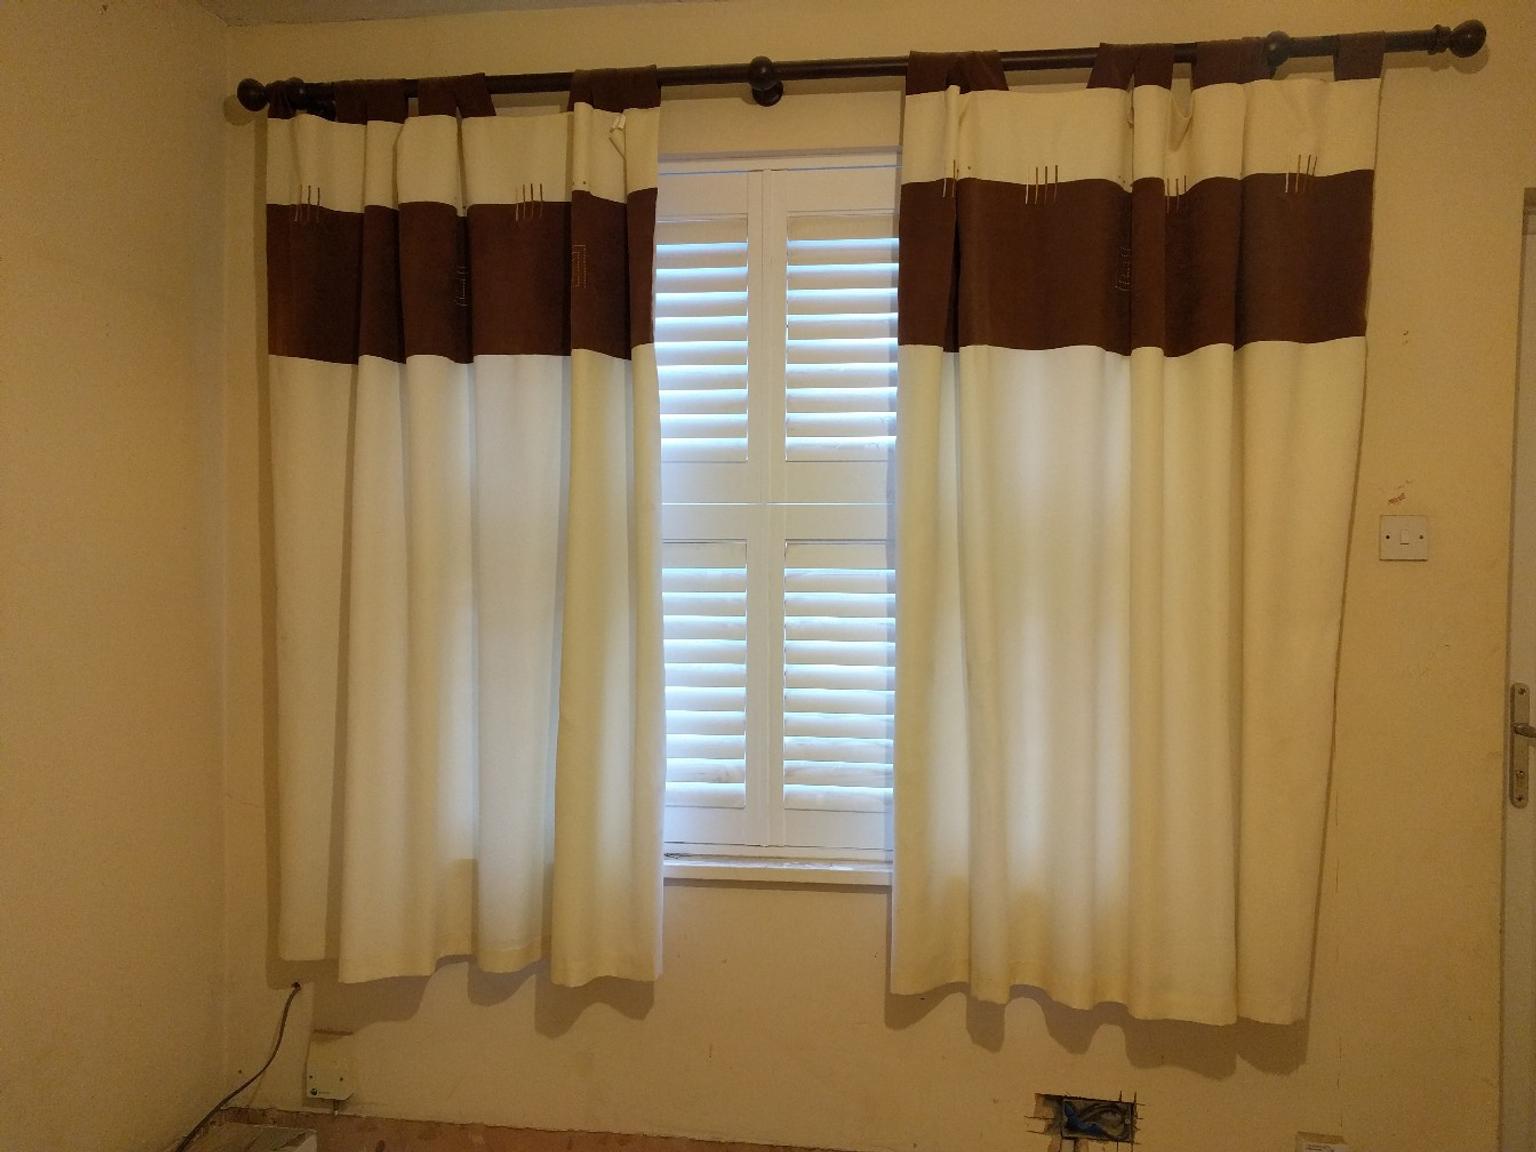 Living Room Curtains With Ties In CR2 Croydon For 800 For Sale Shpock